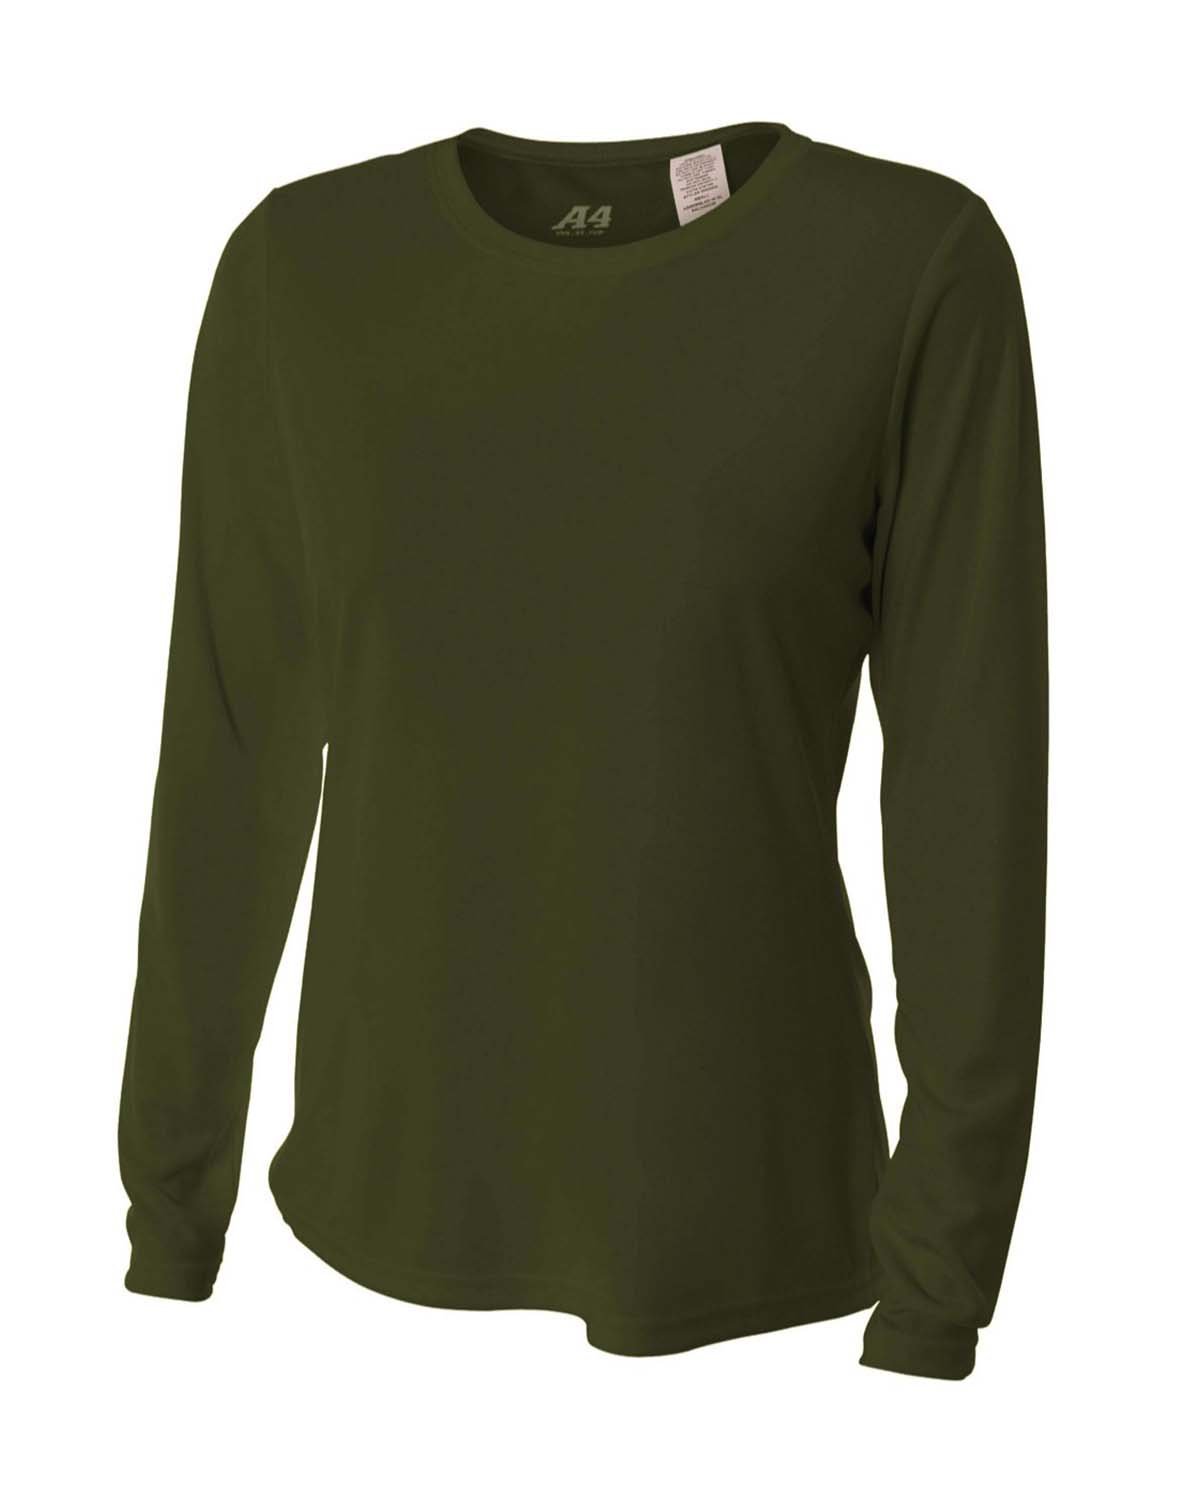 A4 Ladies' Long Sleeve Cooling Performance Crew Shirt MILITARY GREEN 